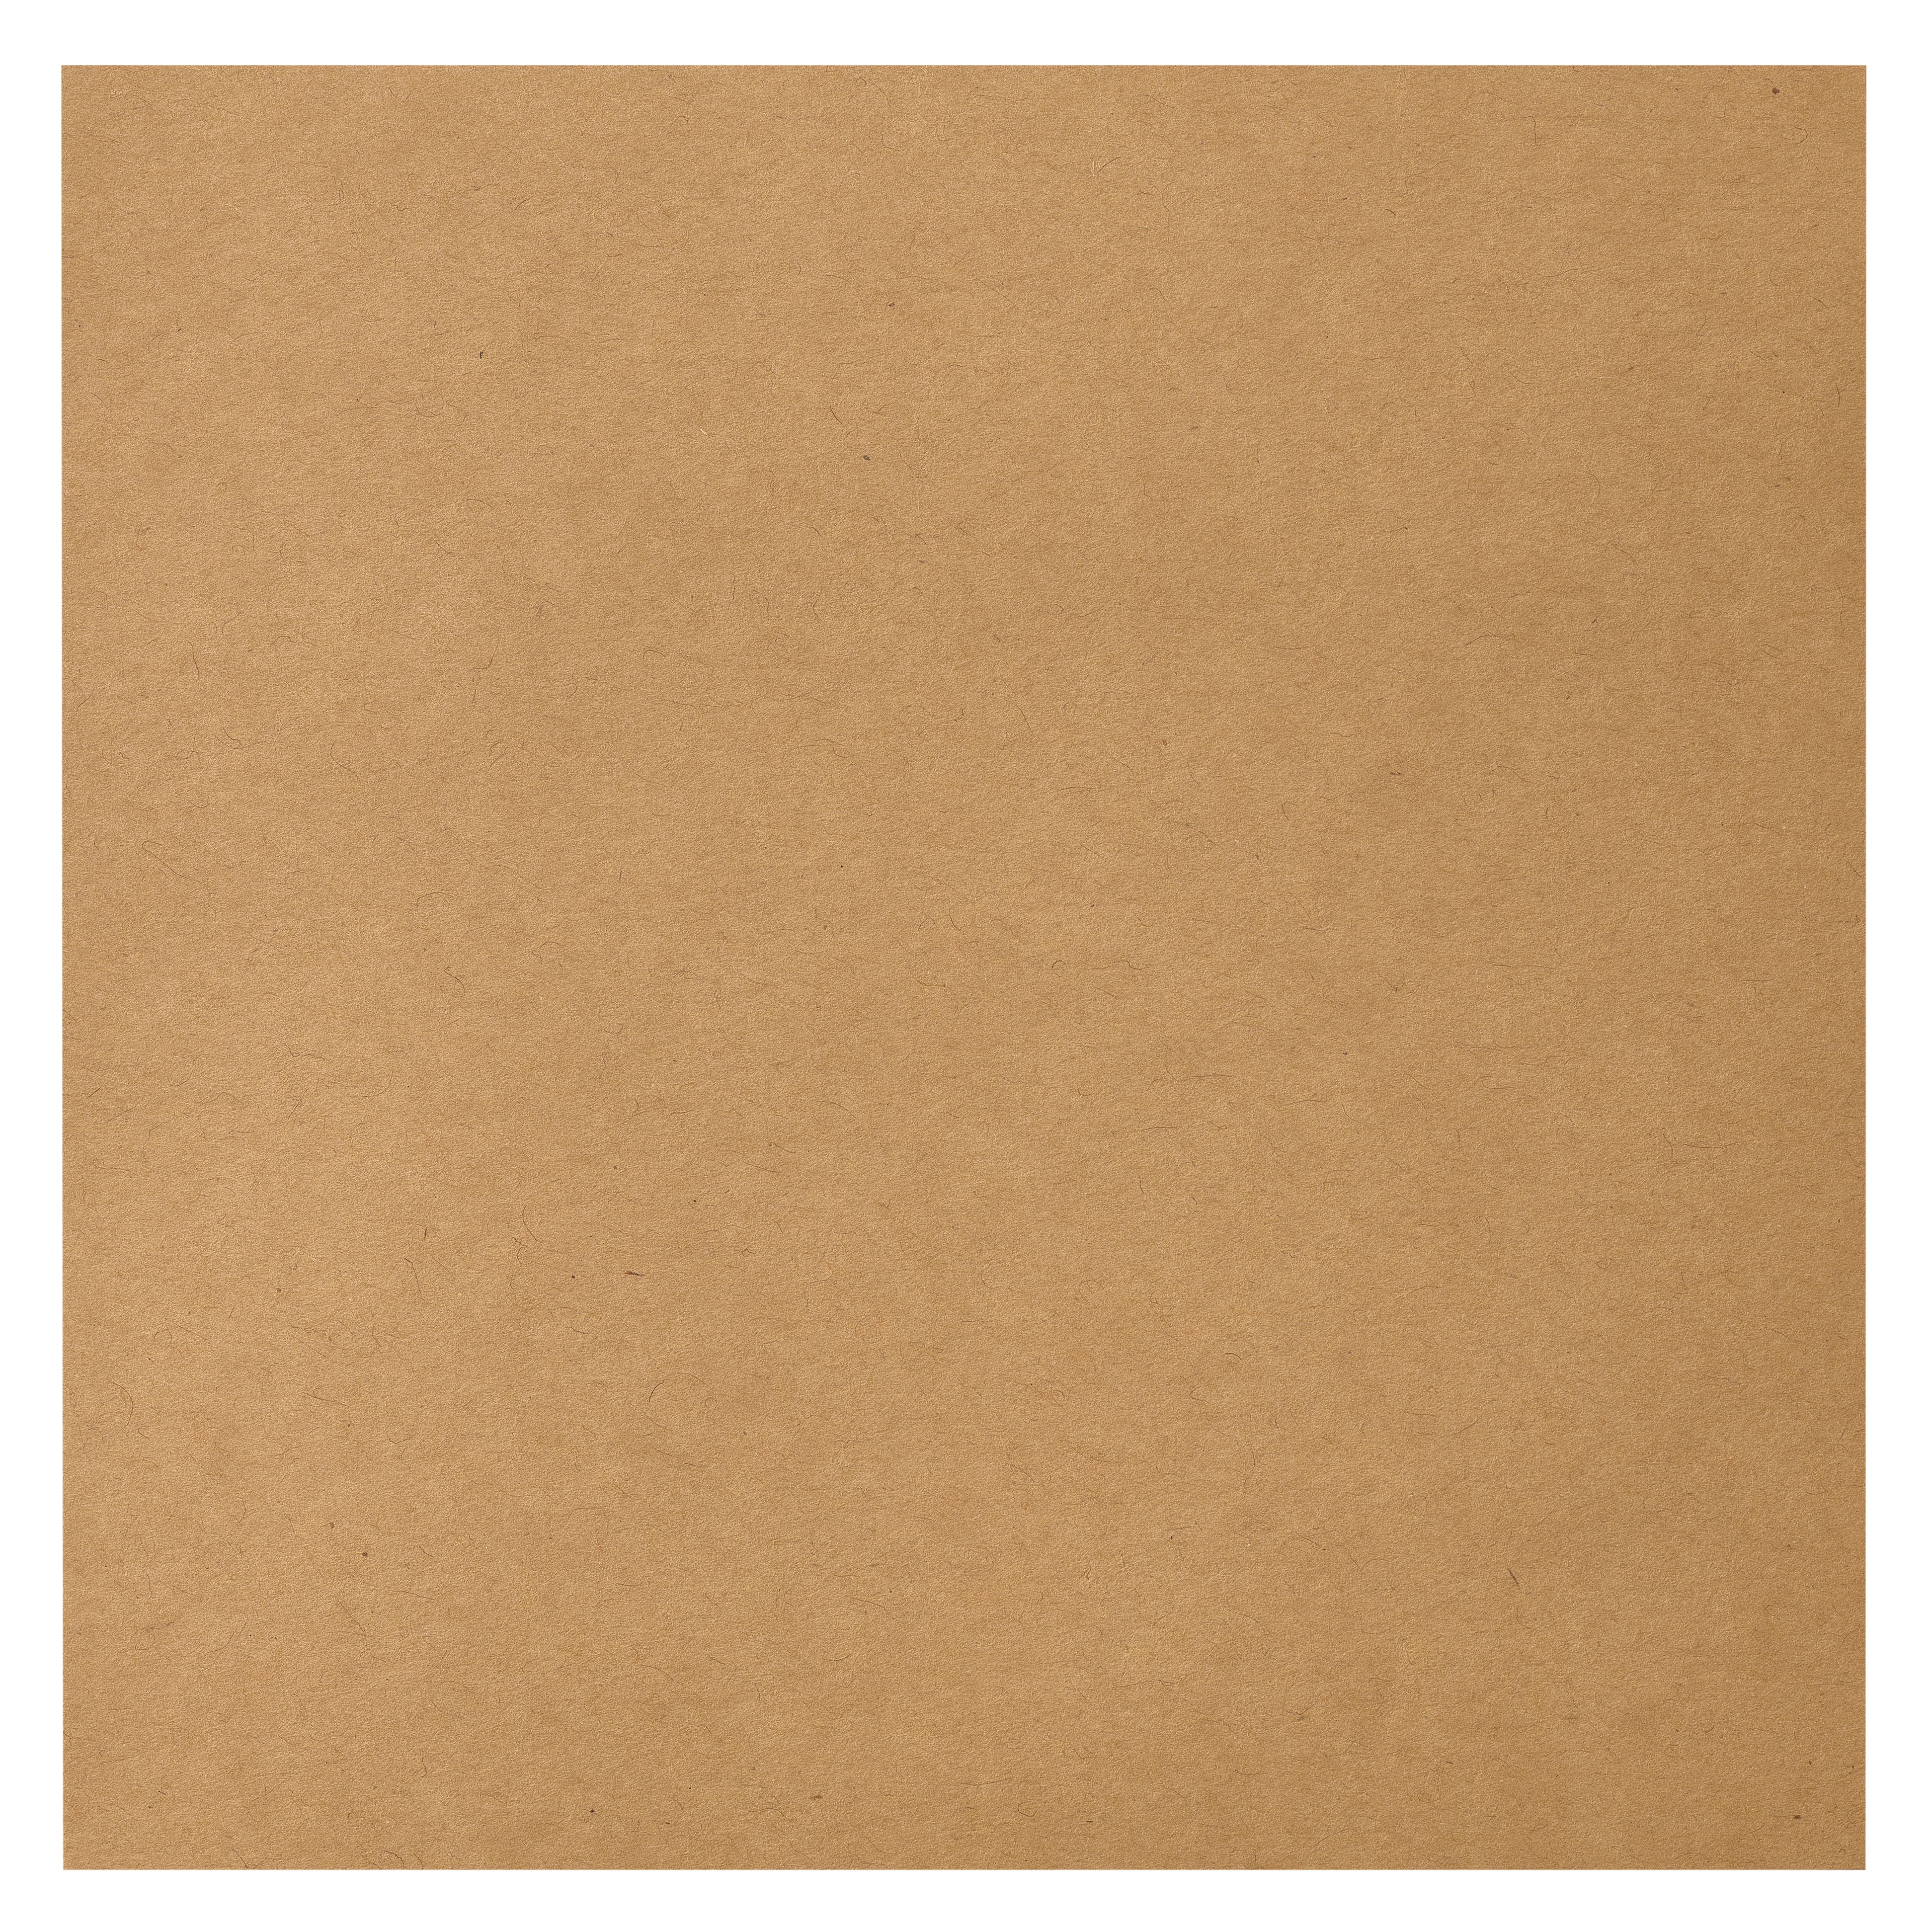 White 6 x 6 Cardstock Paper by Recollections 100 Sheets | Michaels